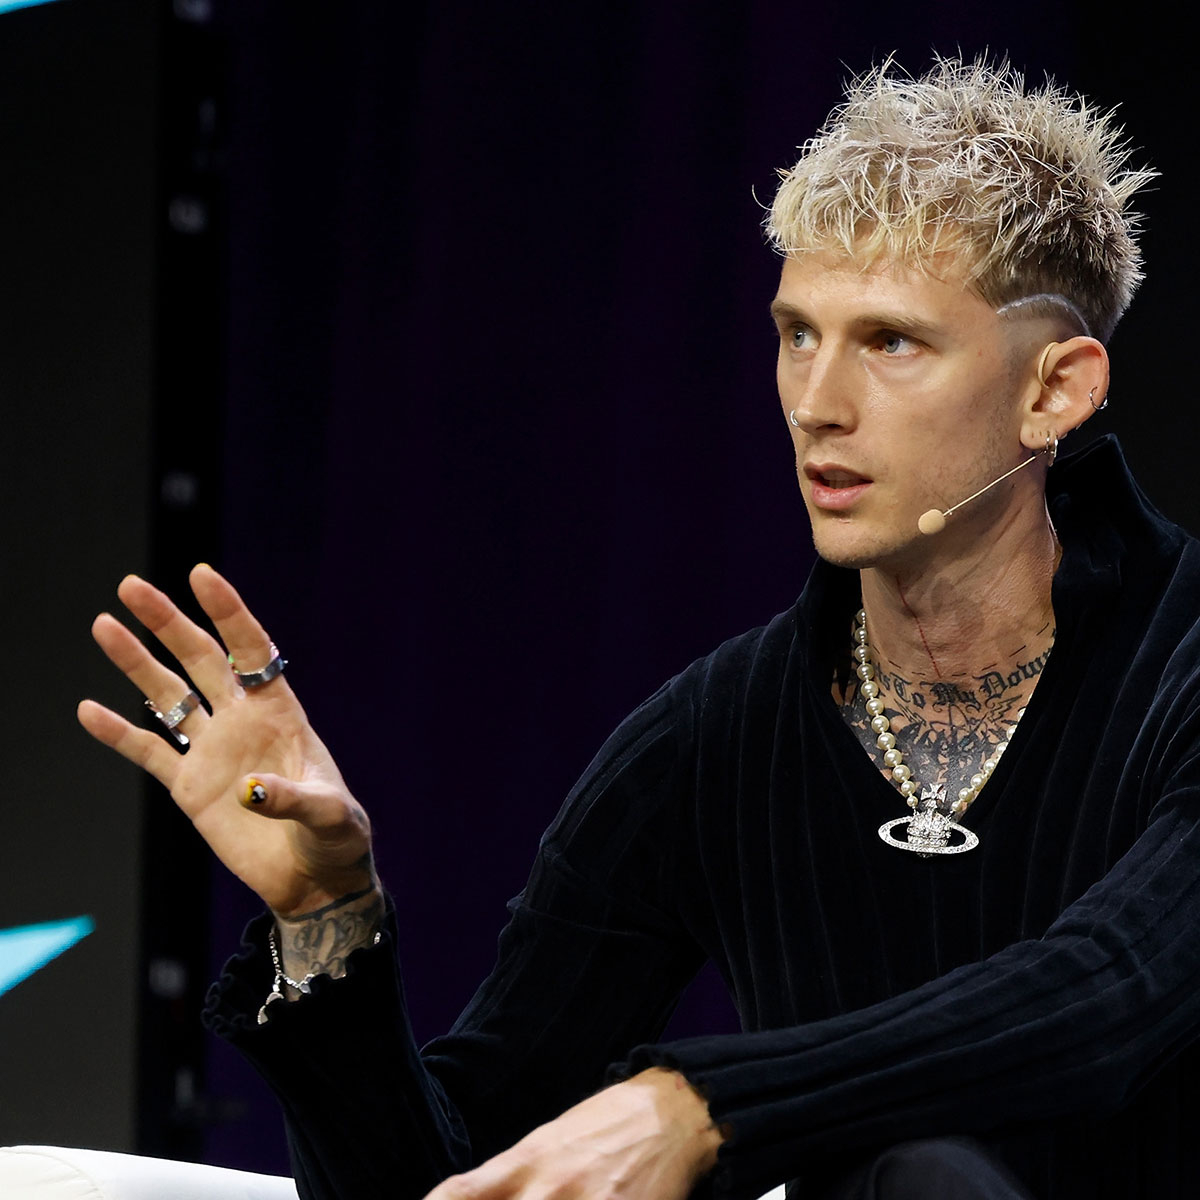 Machine Gun Kelly Responds on Bad Look After Man Rushes Stage